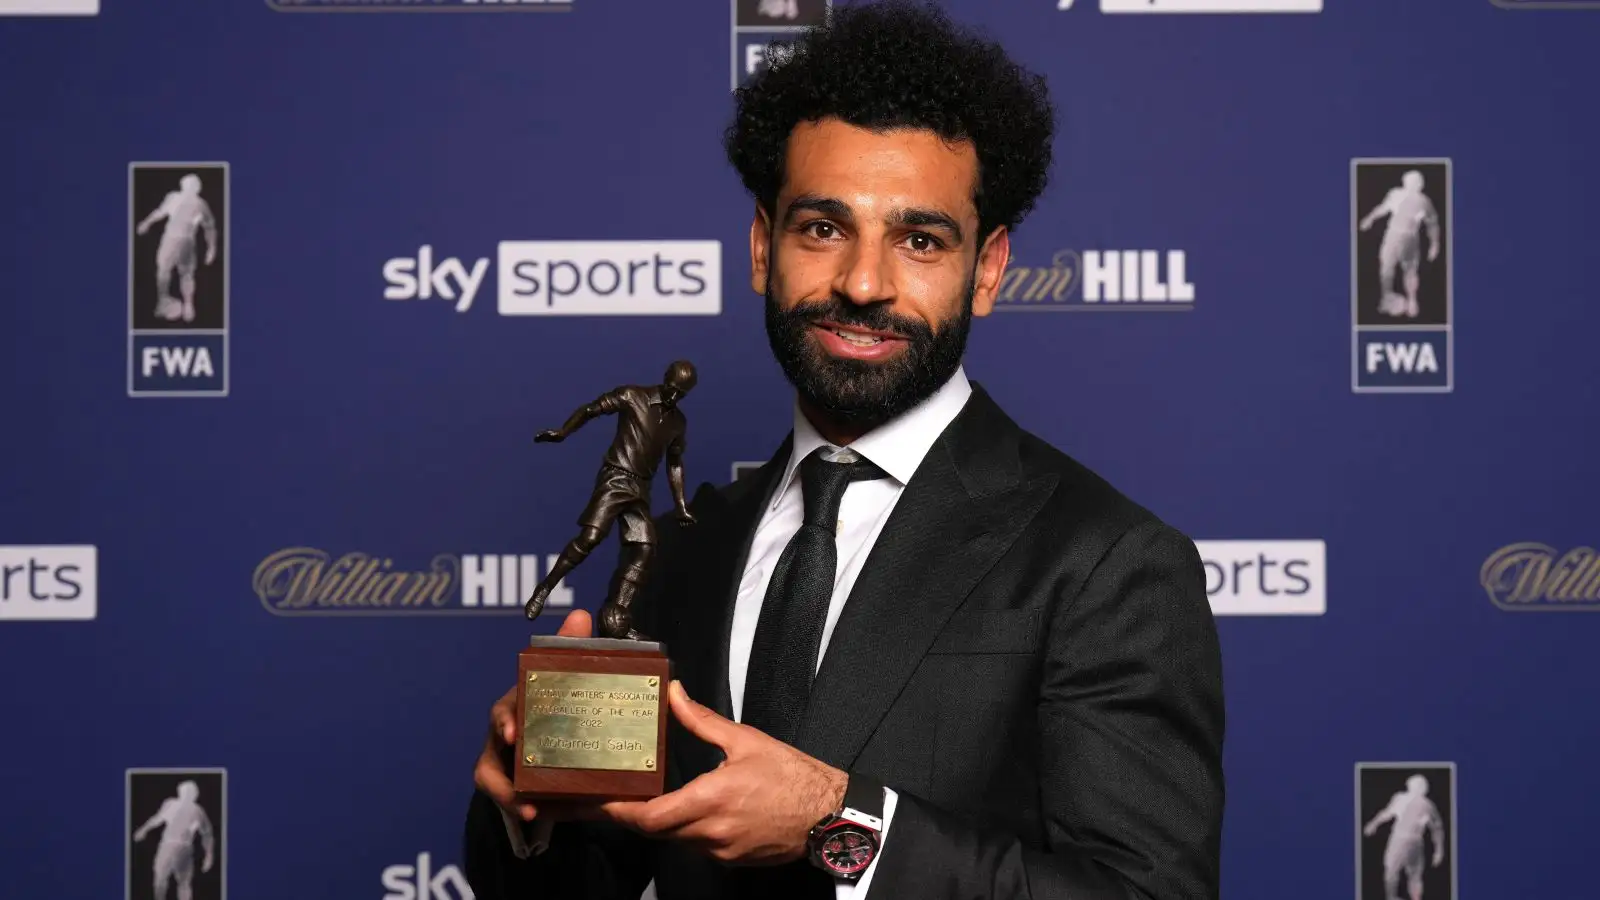 Liverpool striker Mo Salah holds the trophy